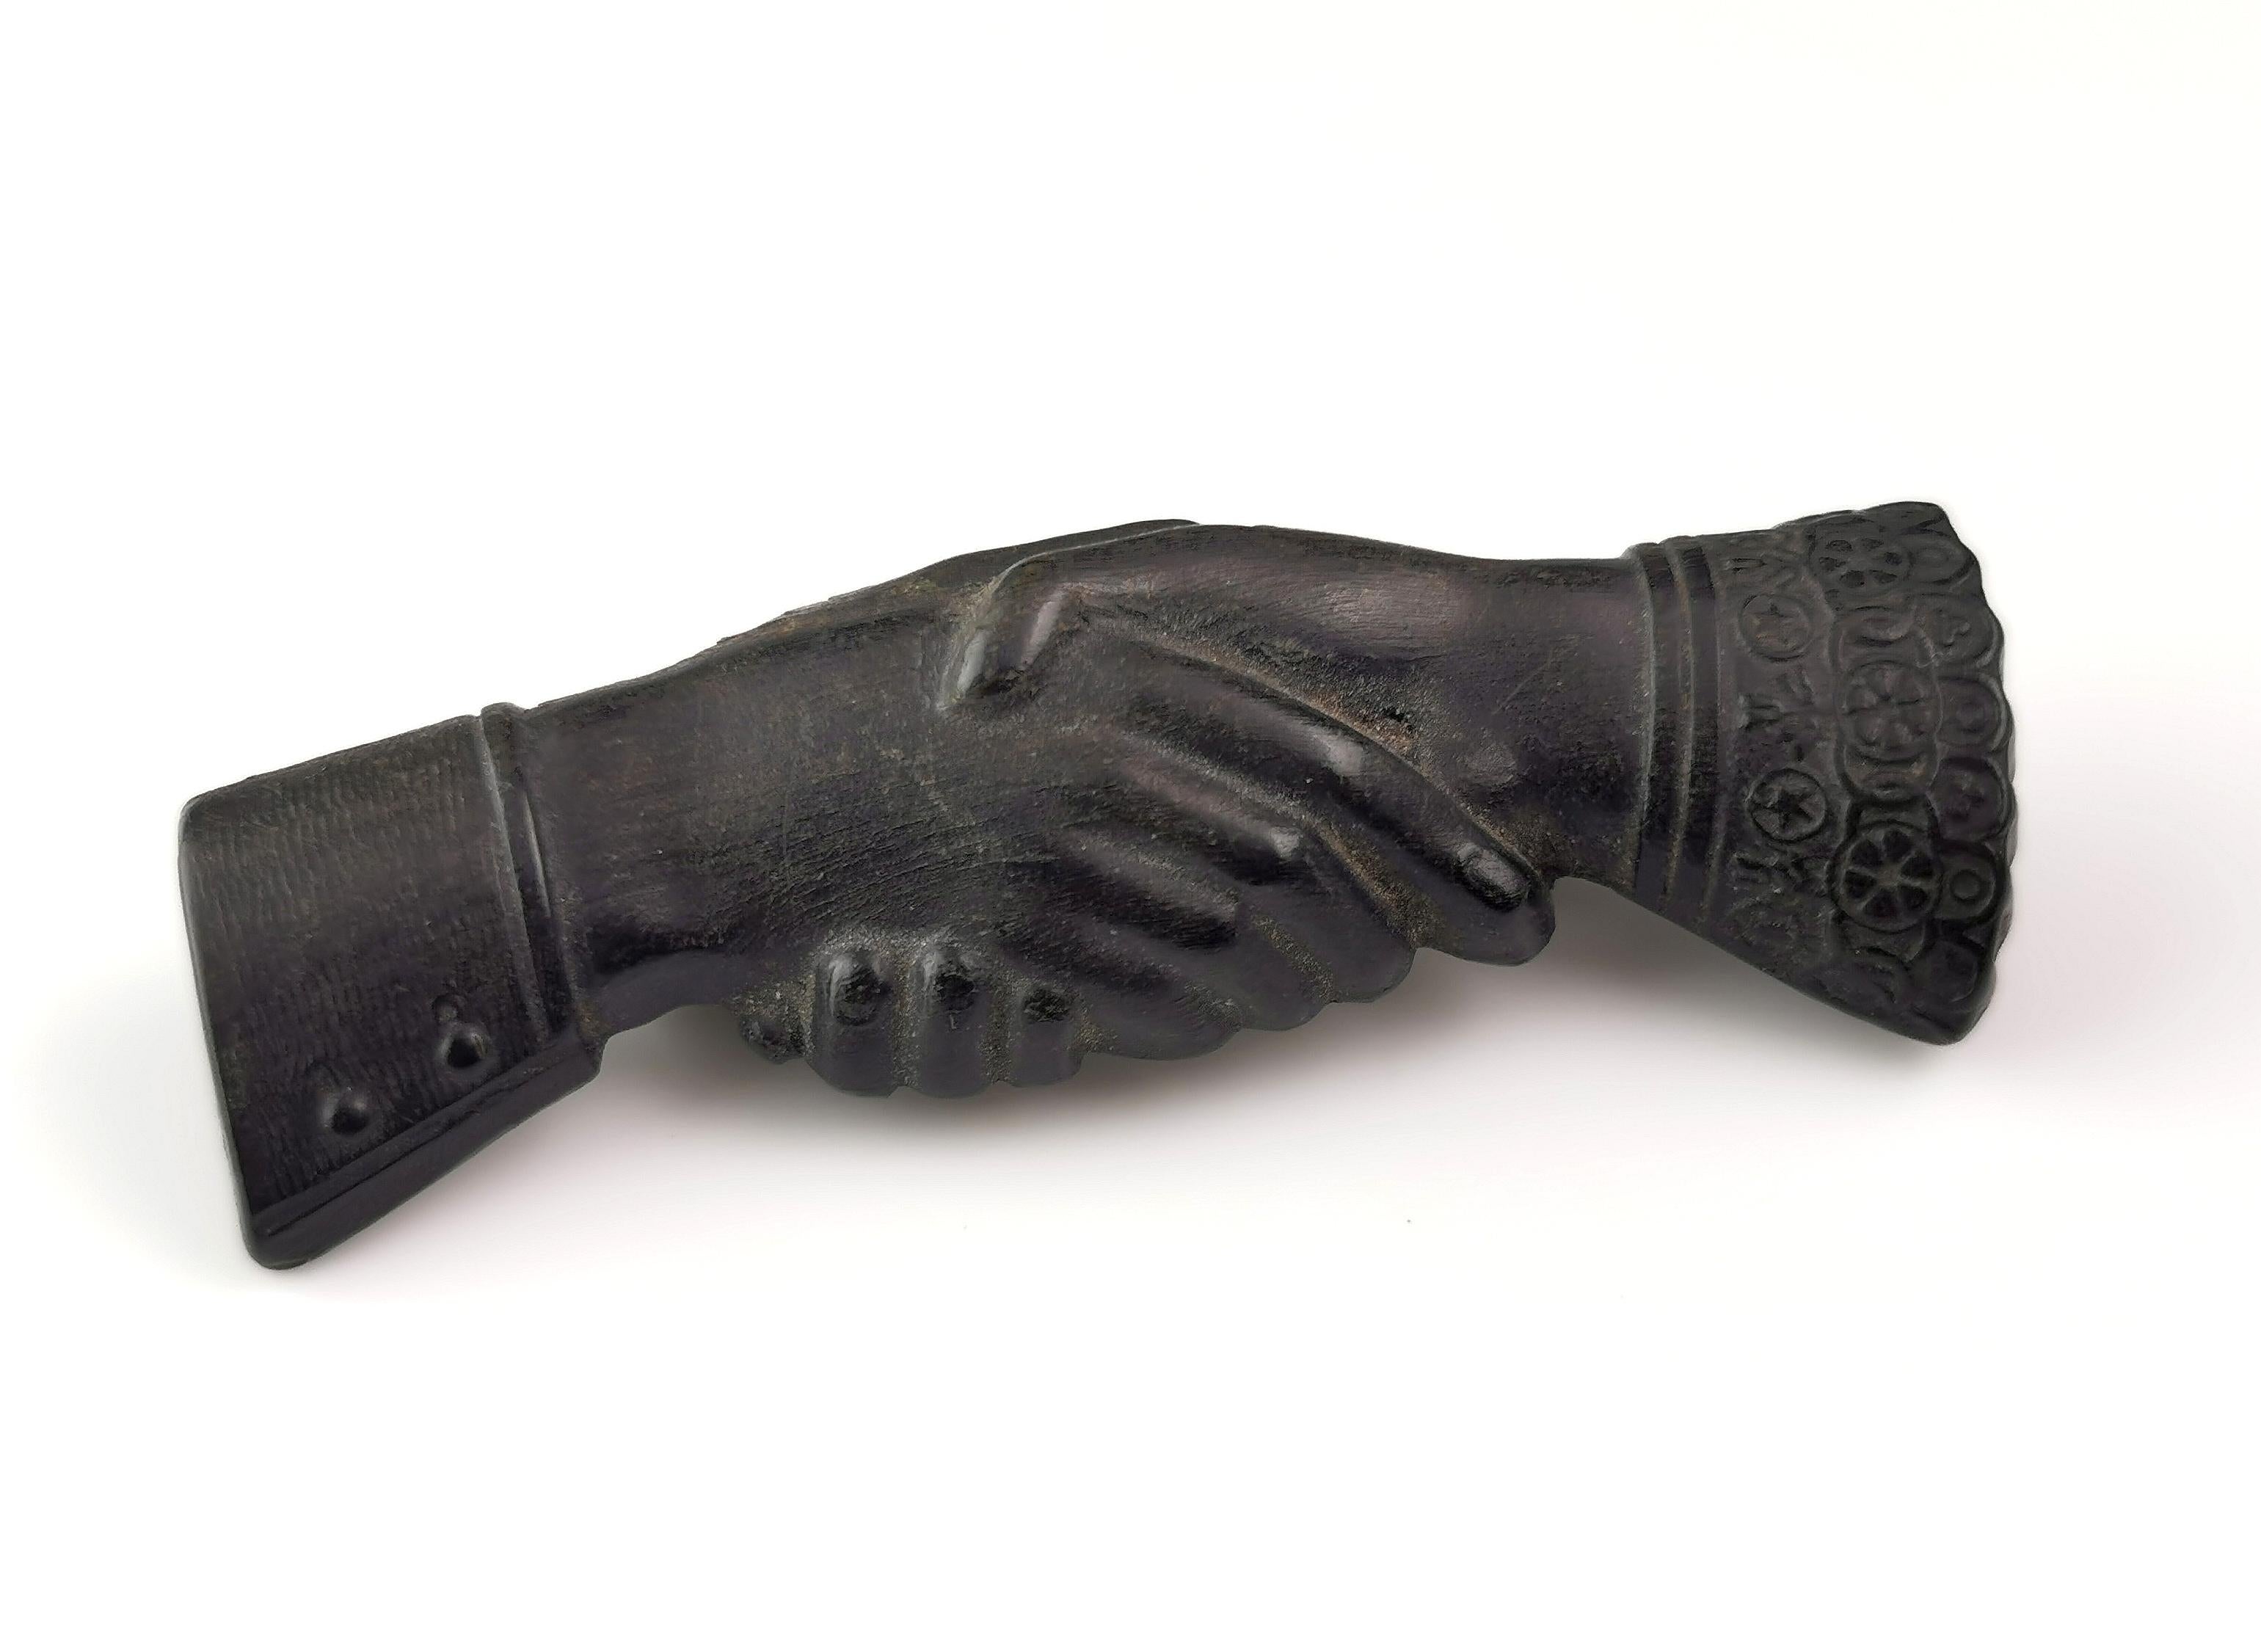 An interesting and scarce Victorian clasped or shaking hands brooch.

It is crafted from bog oak with a rich deep brown / black colour.

The pin is carved as two hands clasped or shaking not dissimilar to the earlier Fede style often found in rings